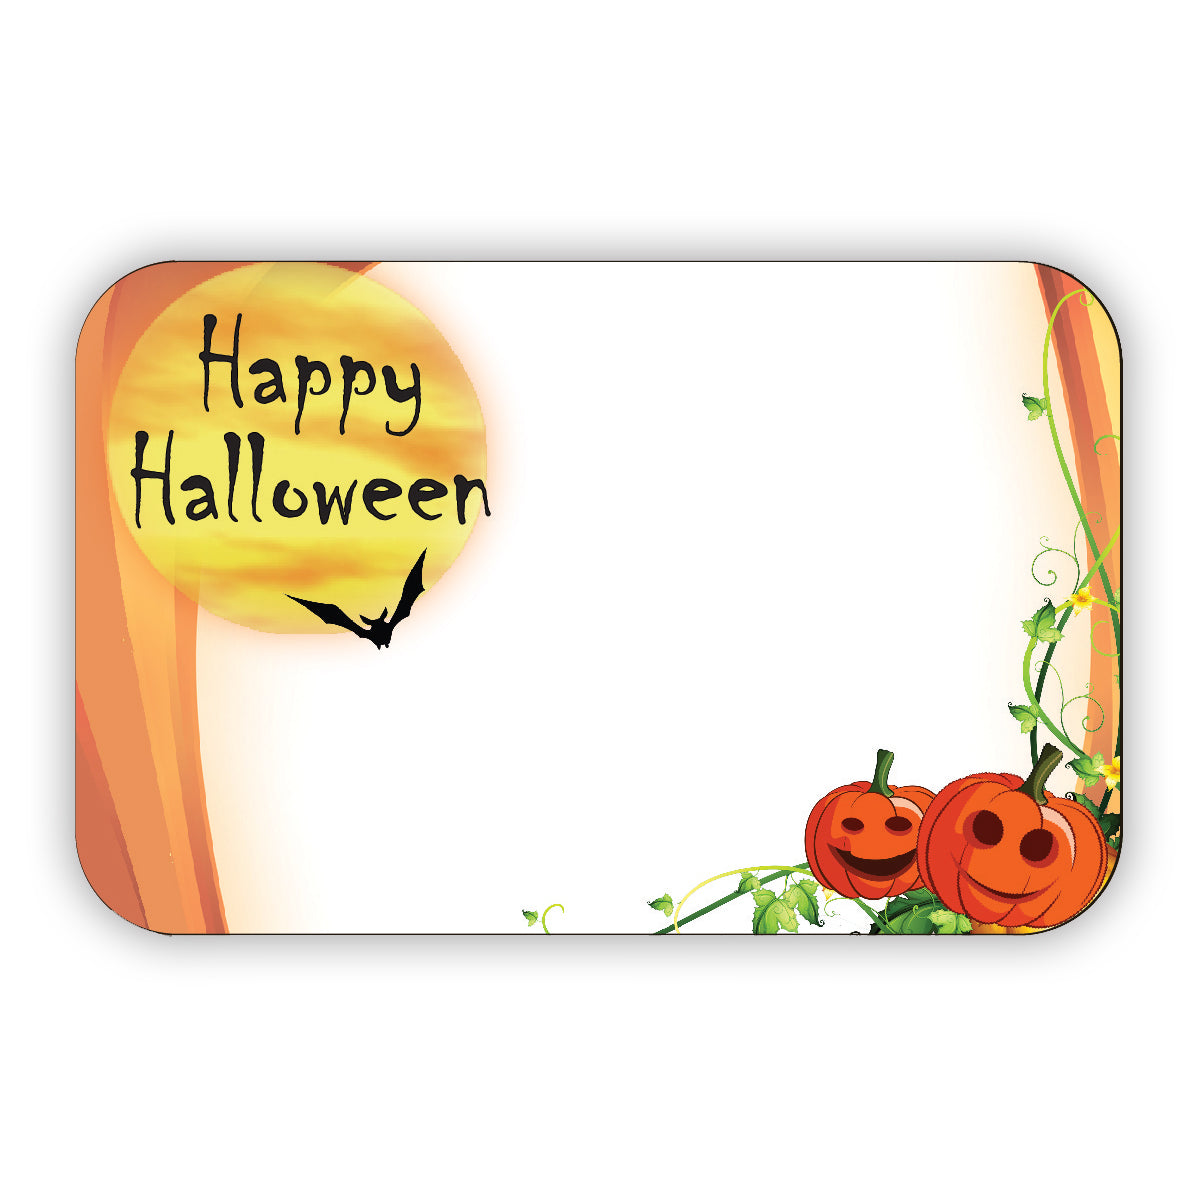 Happy Halloween Enclosure Cards | 50 Count | Clearance - While Supplies Last